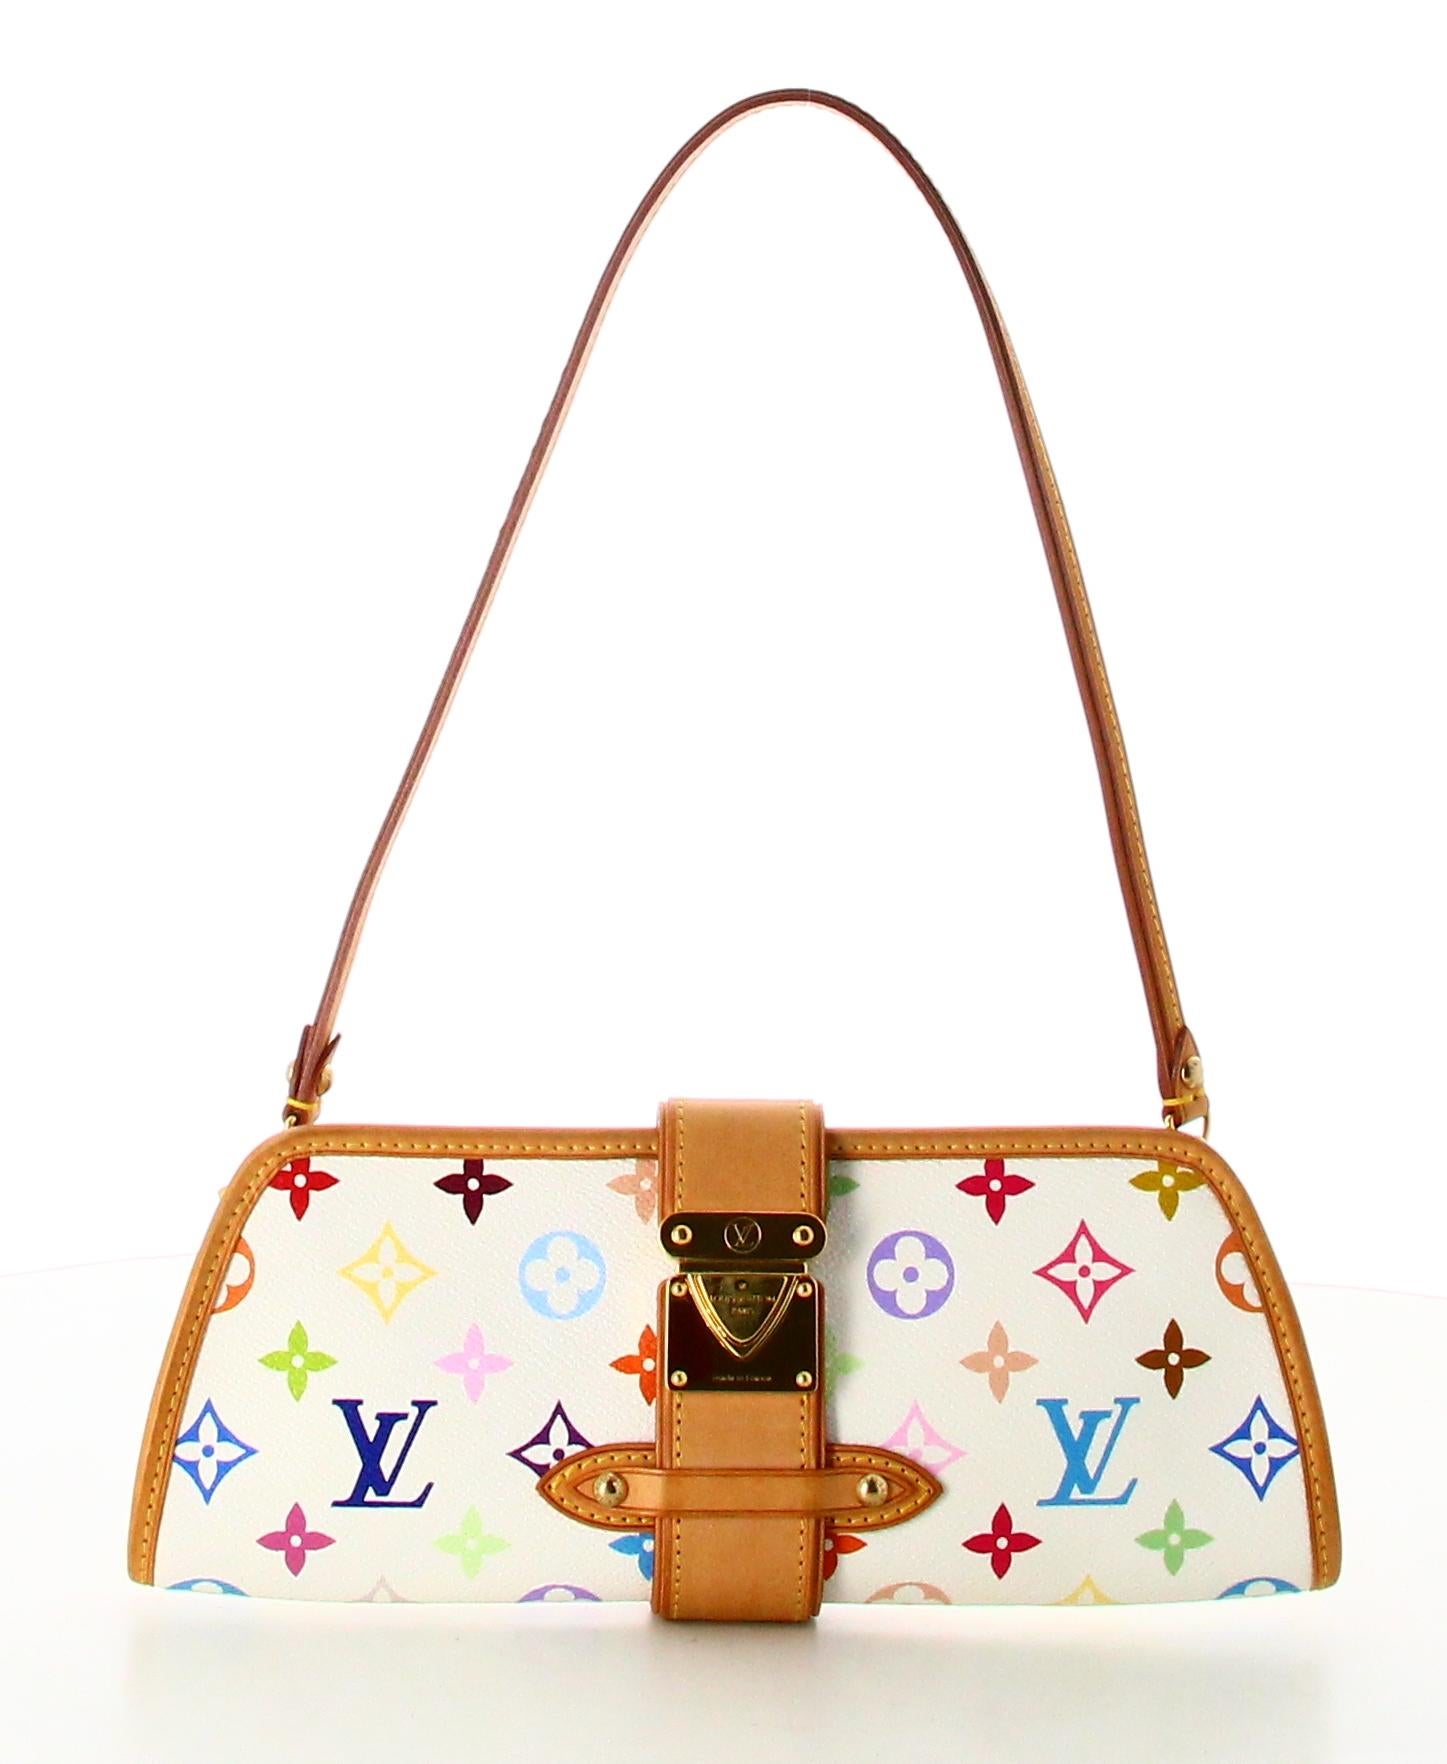 2005 Louis Vuitton Shirley Multicolor Handbag

- Good condition. Shows signs of wear over time. 
- Louis Vuitton Shirley Handbag 
- Multicolor
- Monogram canvas 
- Brown leather strap 
- Clasp : Brown leather shoulder strap and golden lock 
-